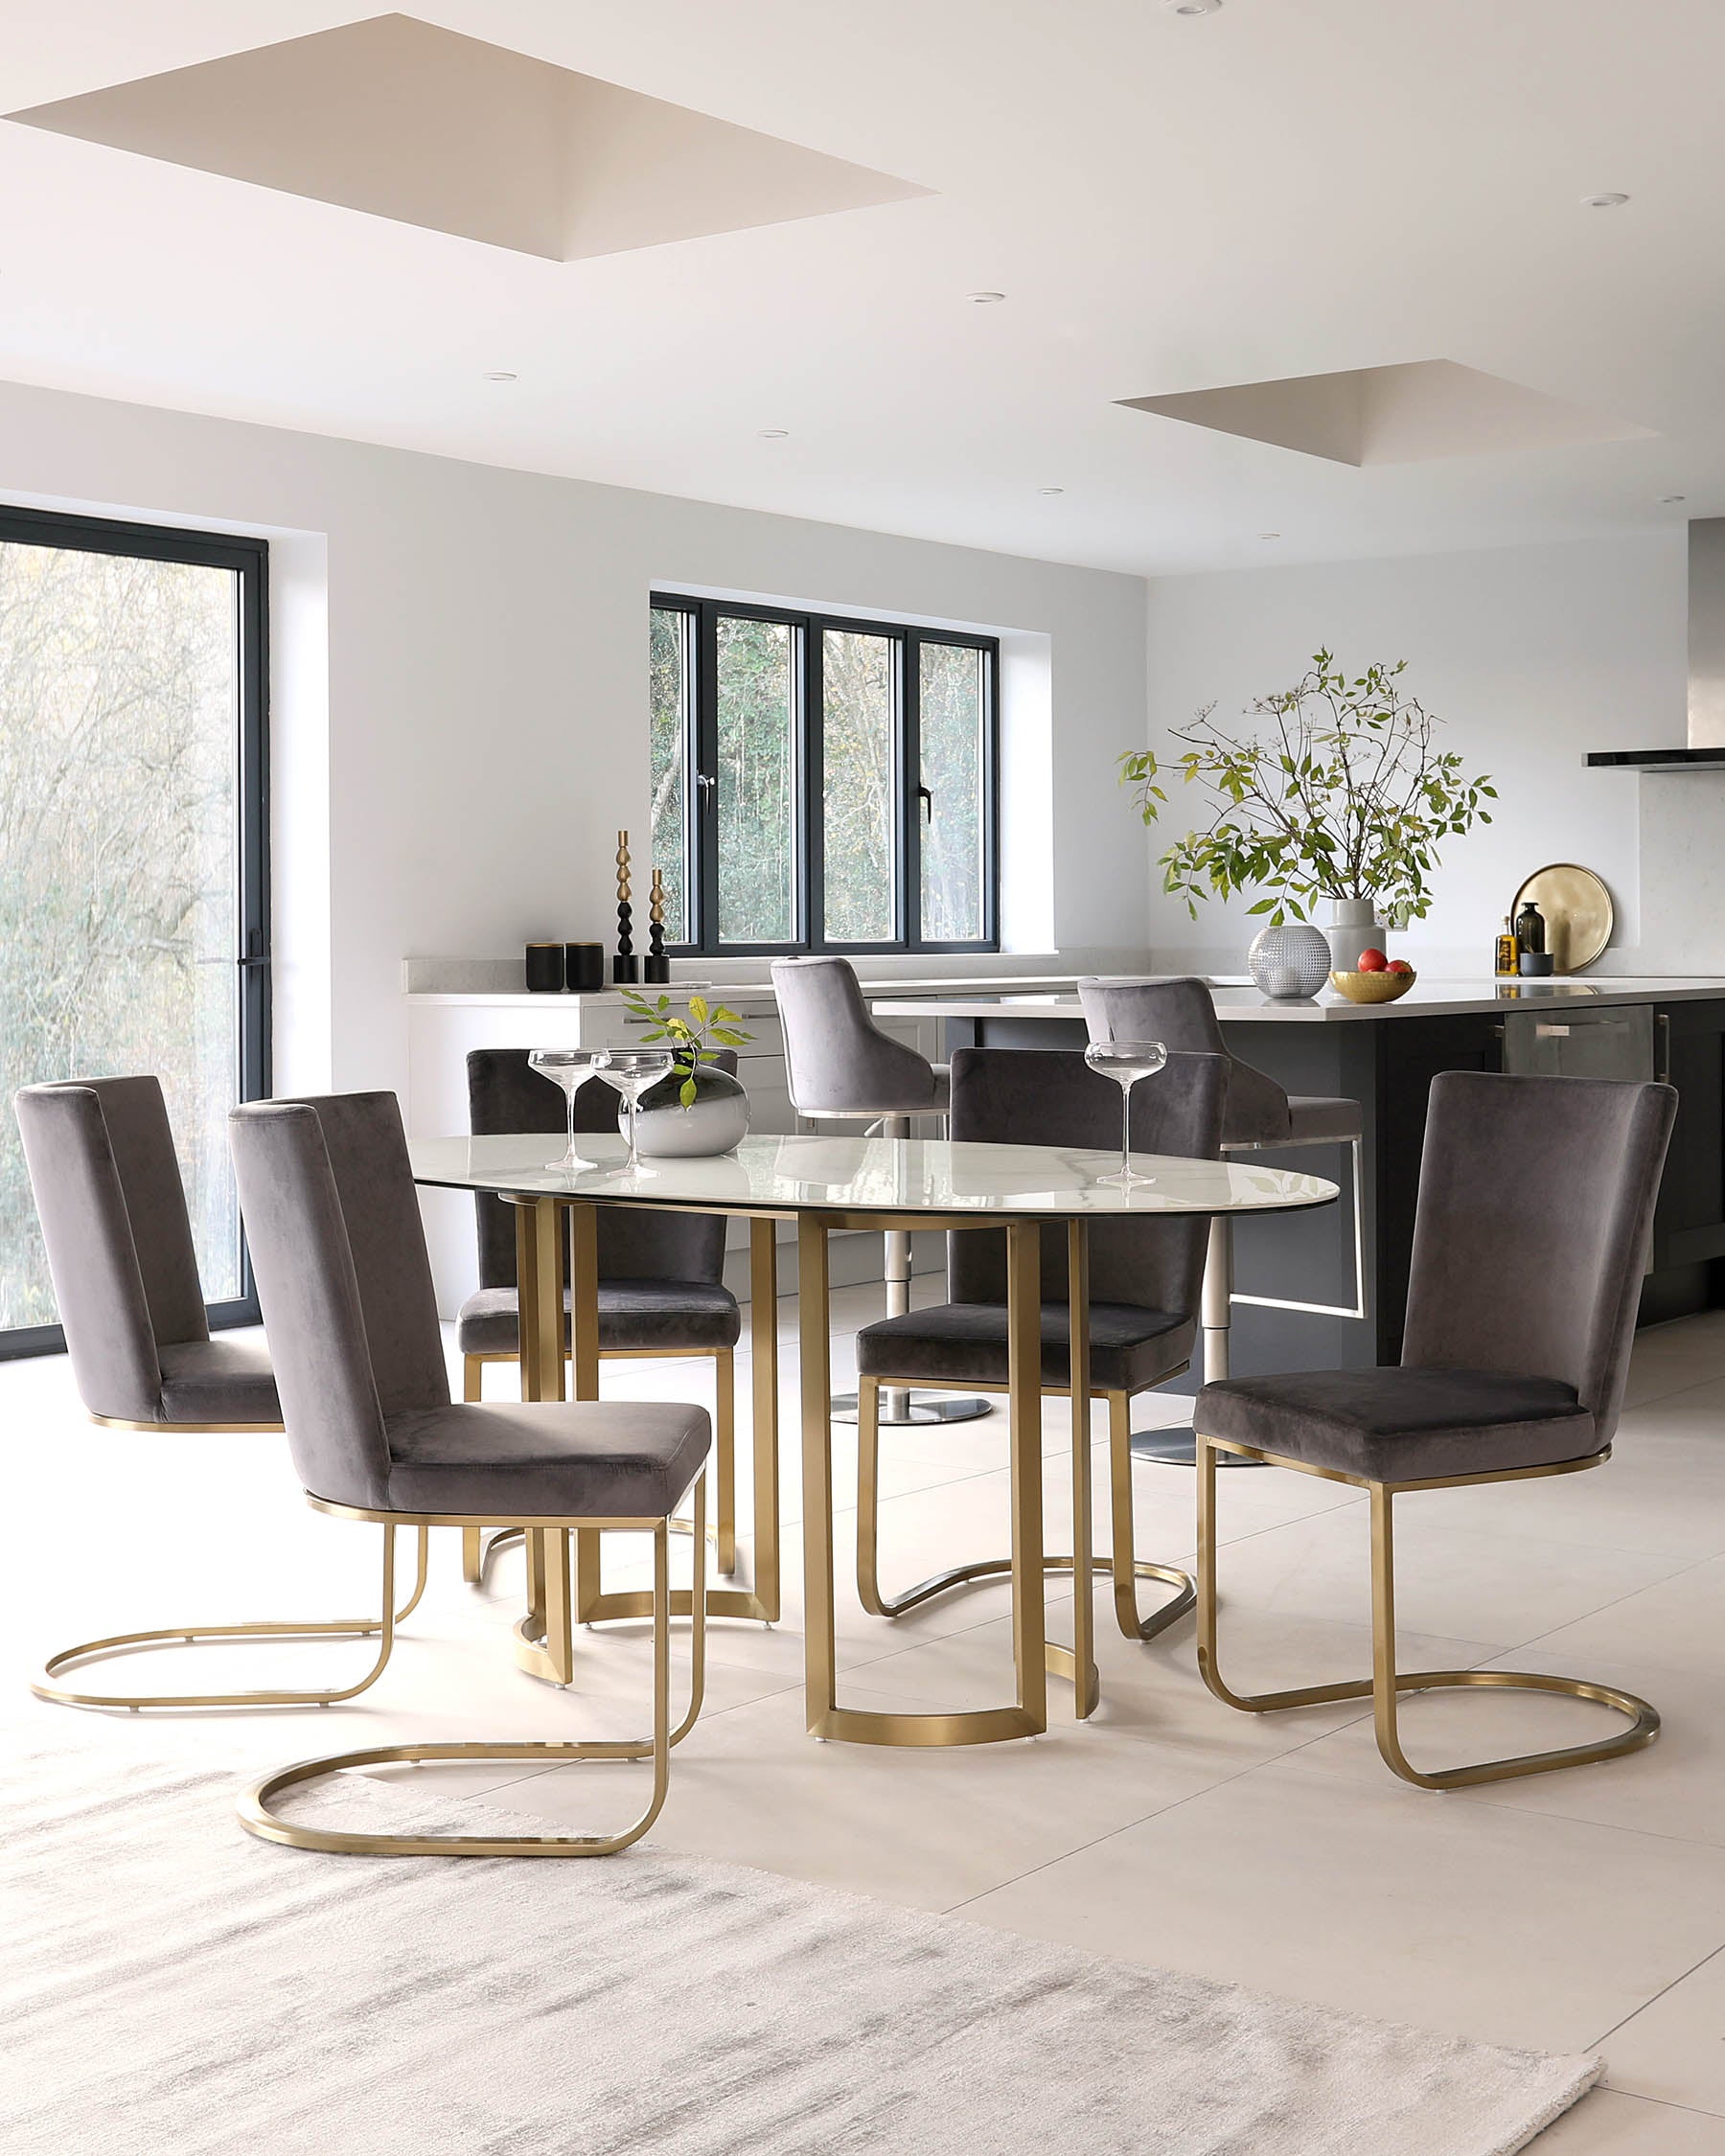 Skylar White Marbled Ceramic And Brass 6 Seater Dining Table